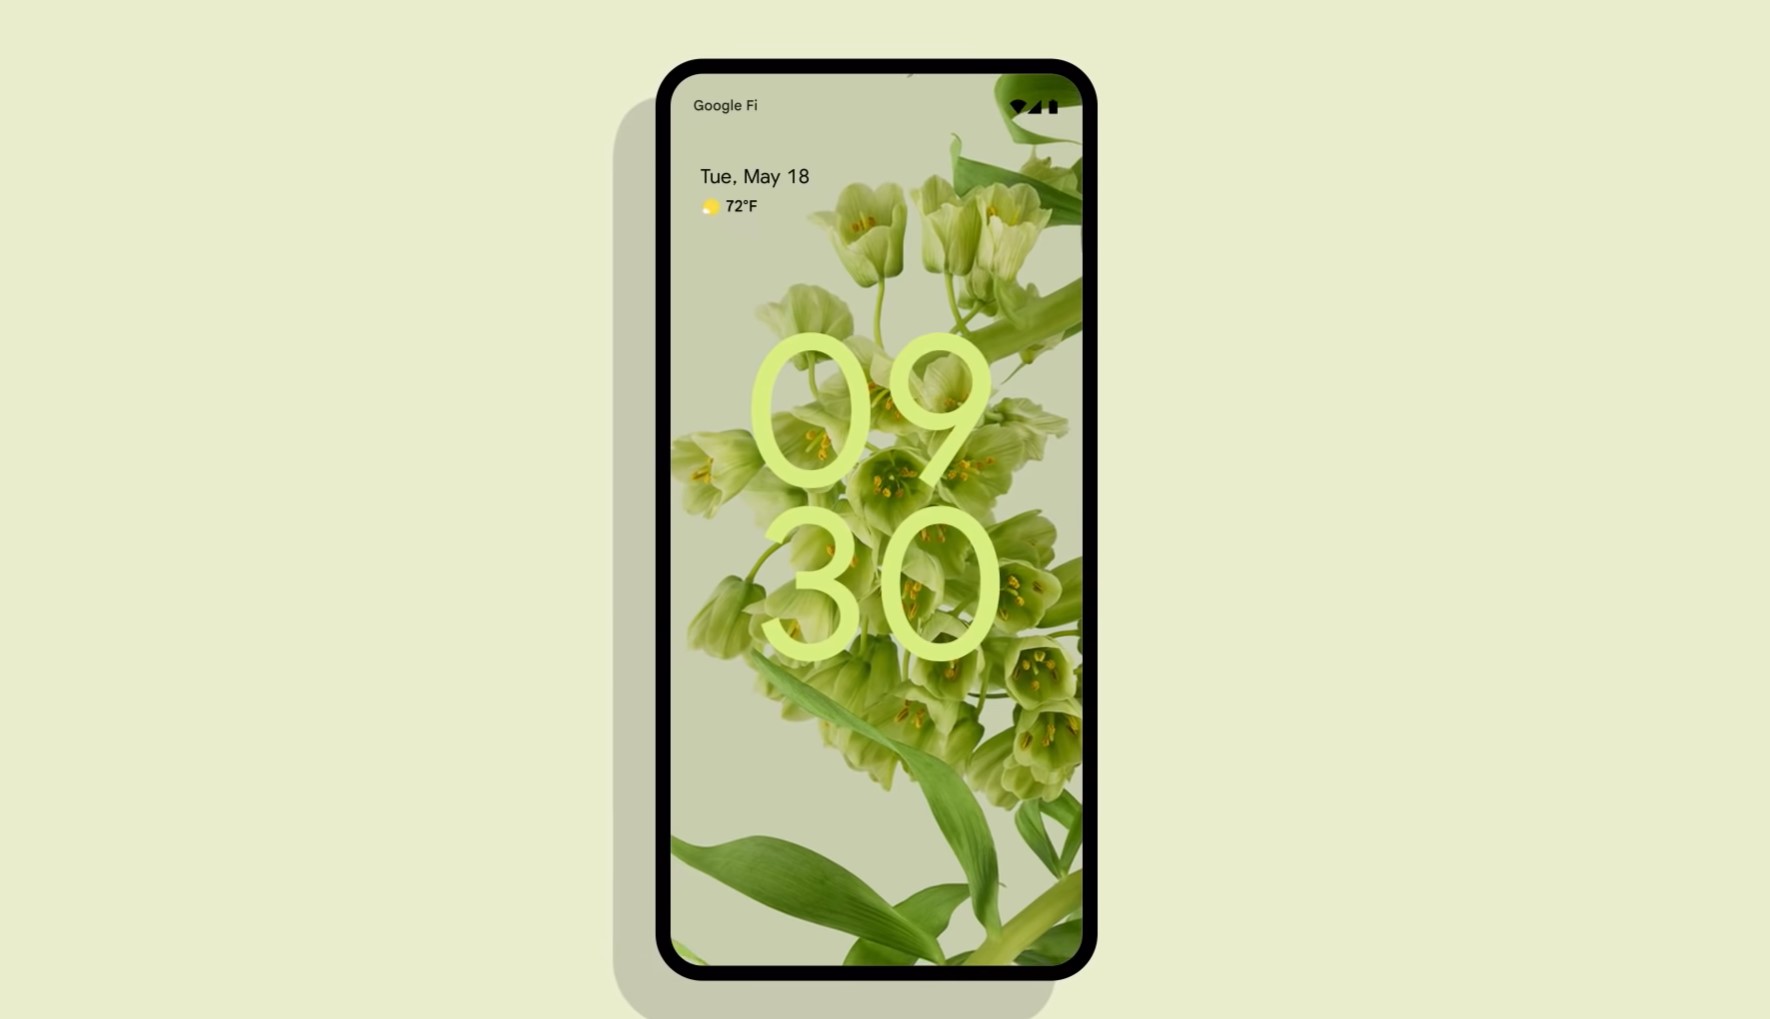 Android 12 Privacy Wallpapers